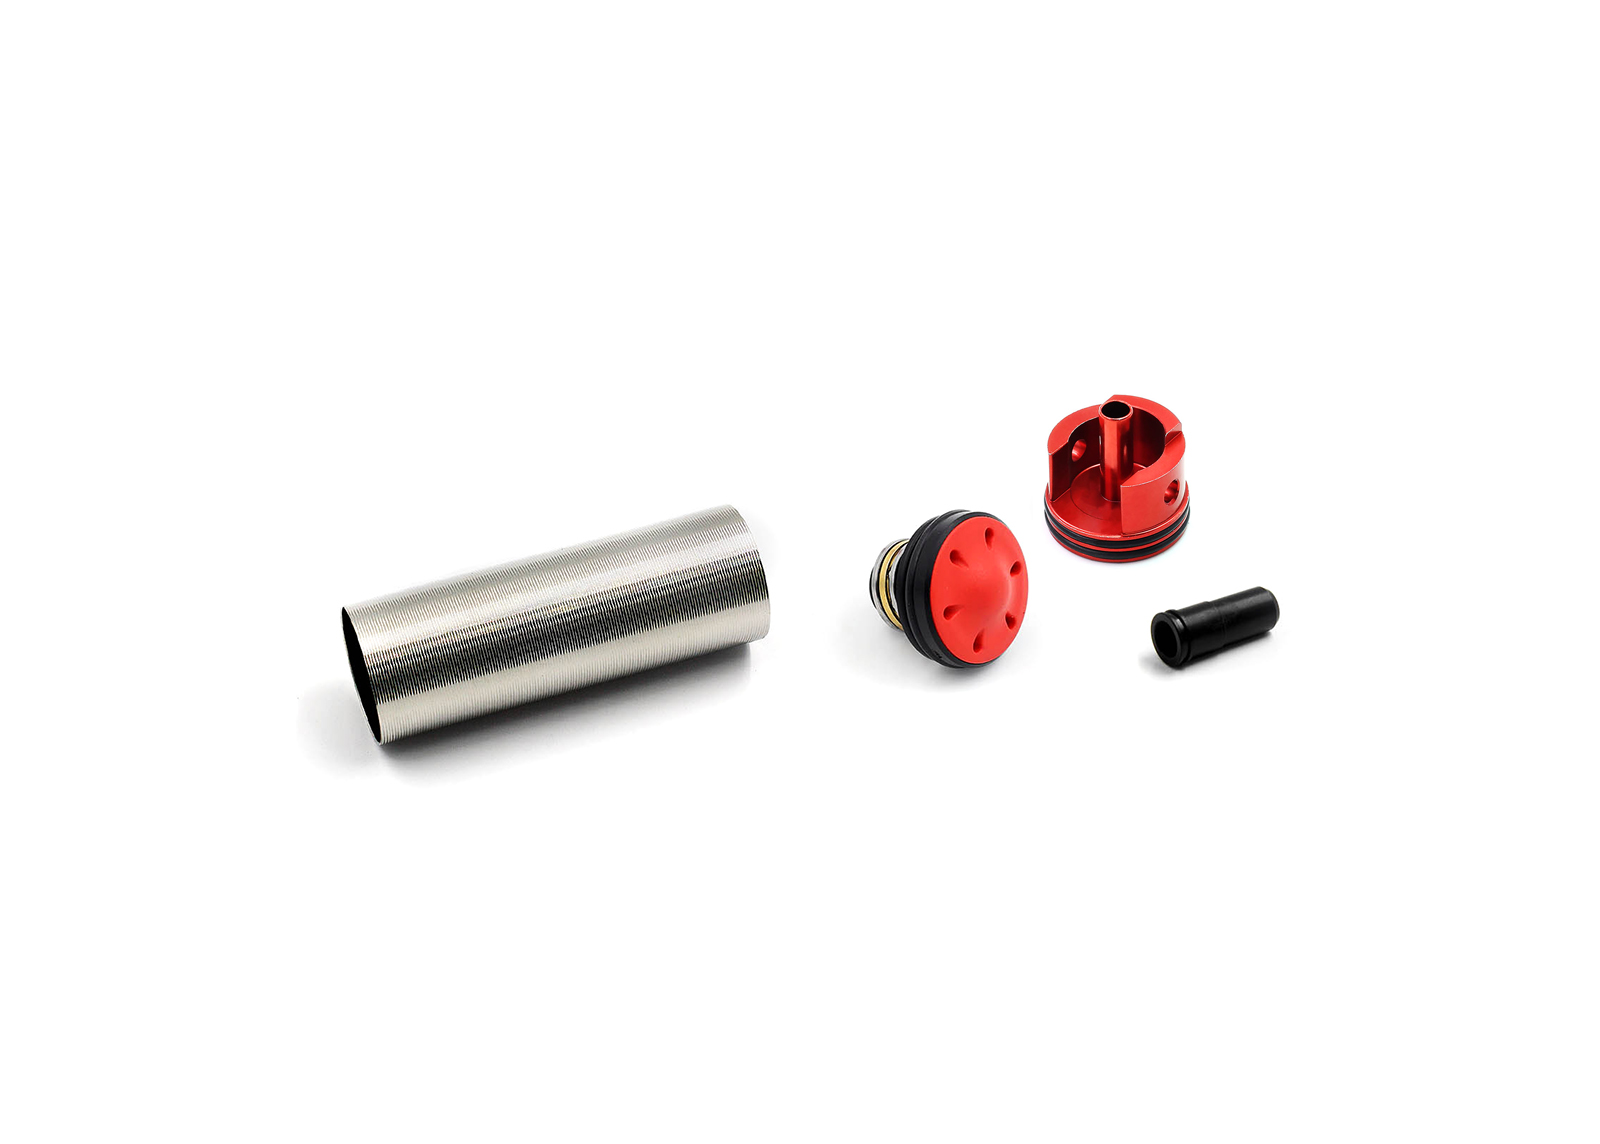 Bore-Up Cylinder Set for AK-47/47S - Modify AEG Airsoft parts